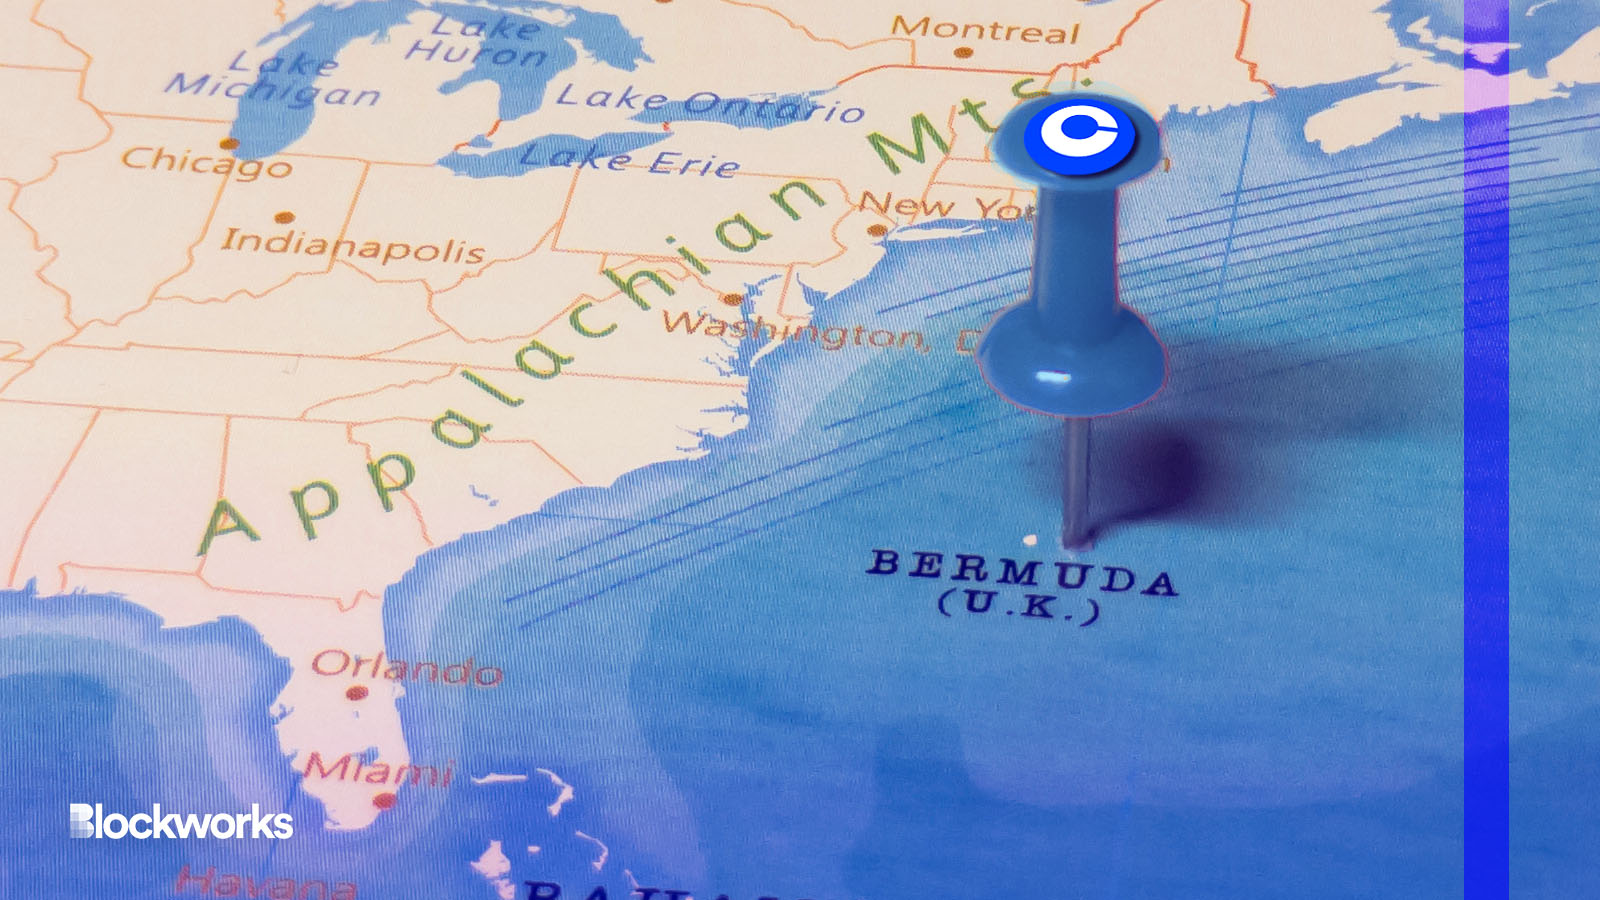 Coinbase Expands To Bermuda, Eyes Abu Dhabi And Derivatives - Blockworks